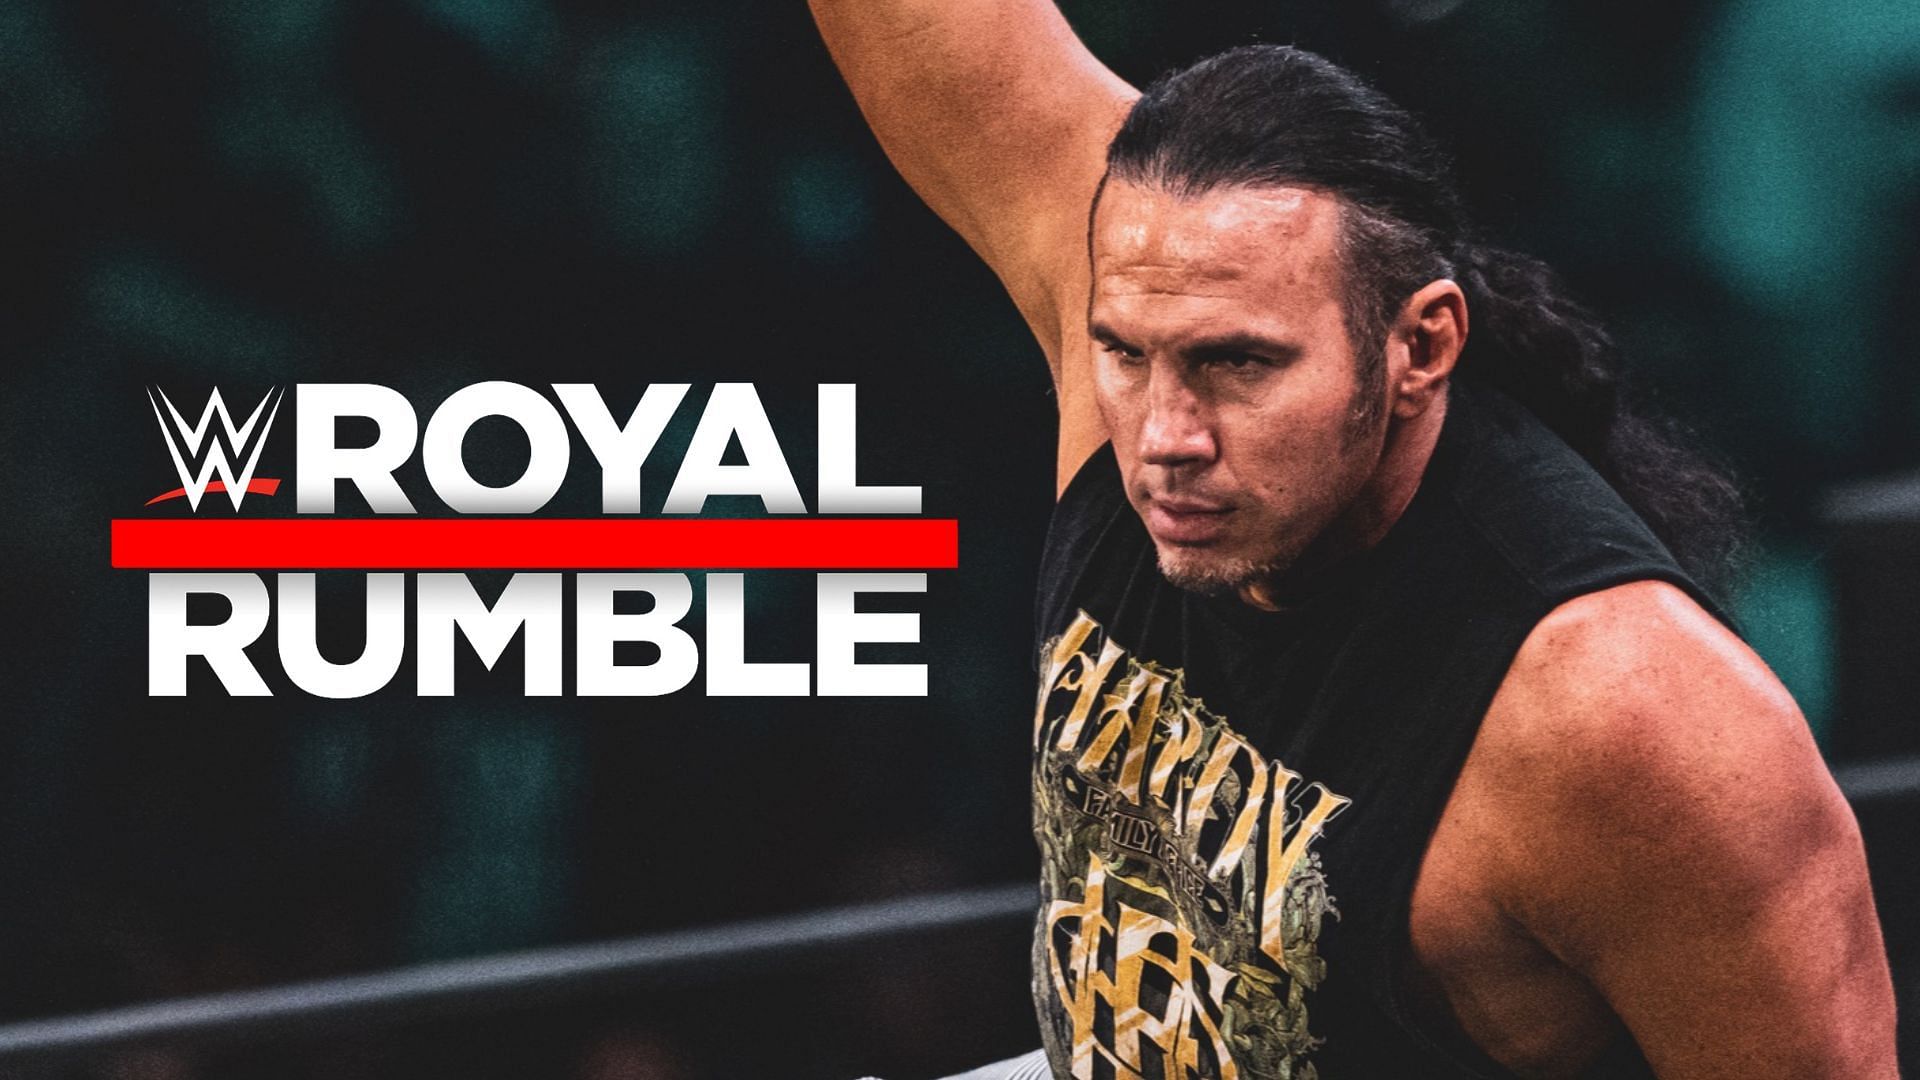 Matt Hardy has recently looked back on a legendary Royal Rumble match